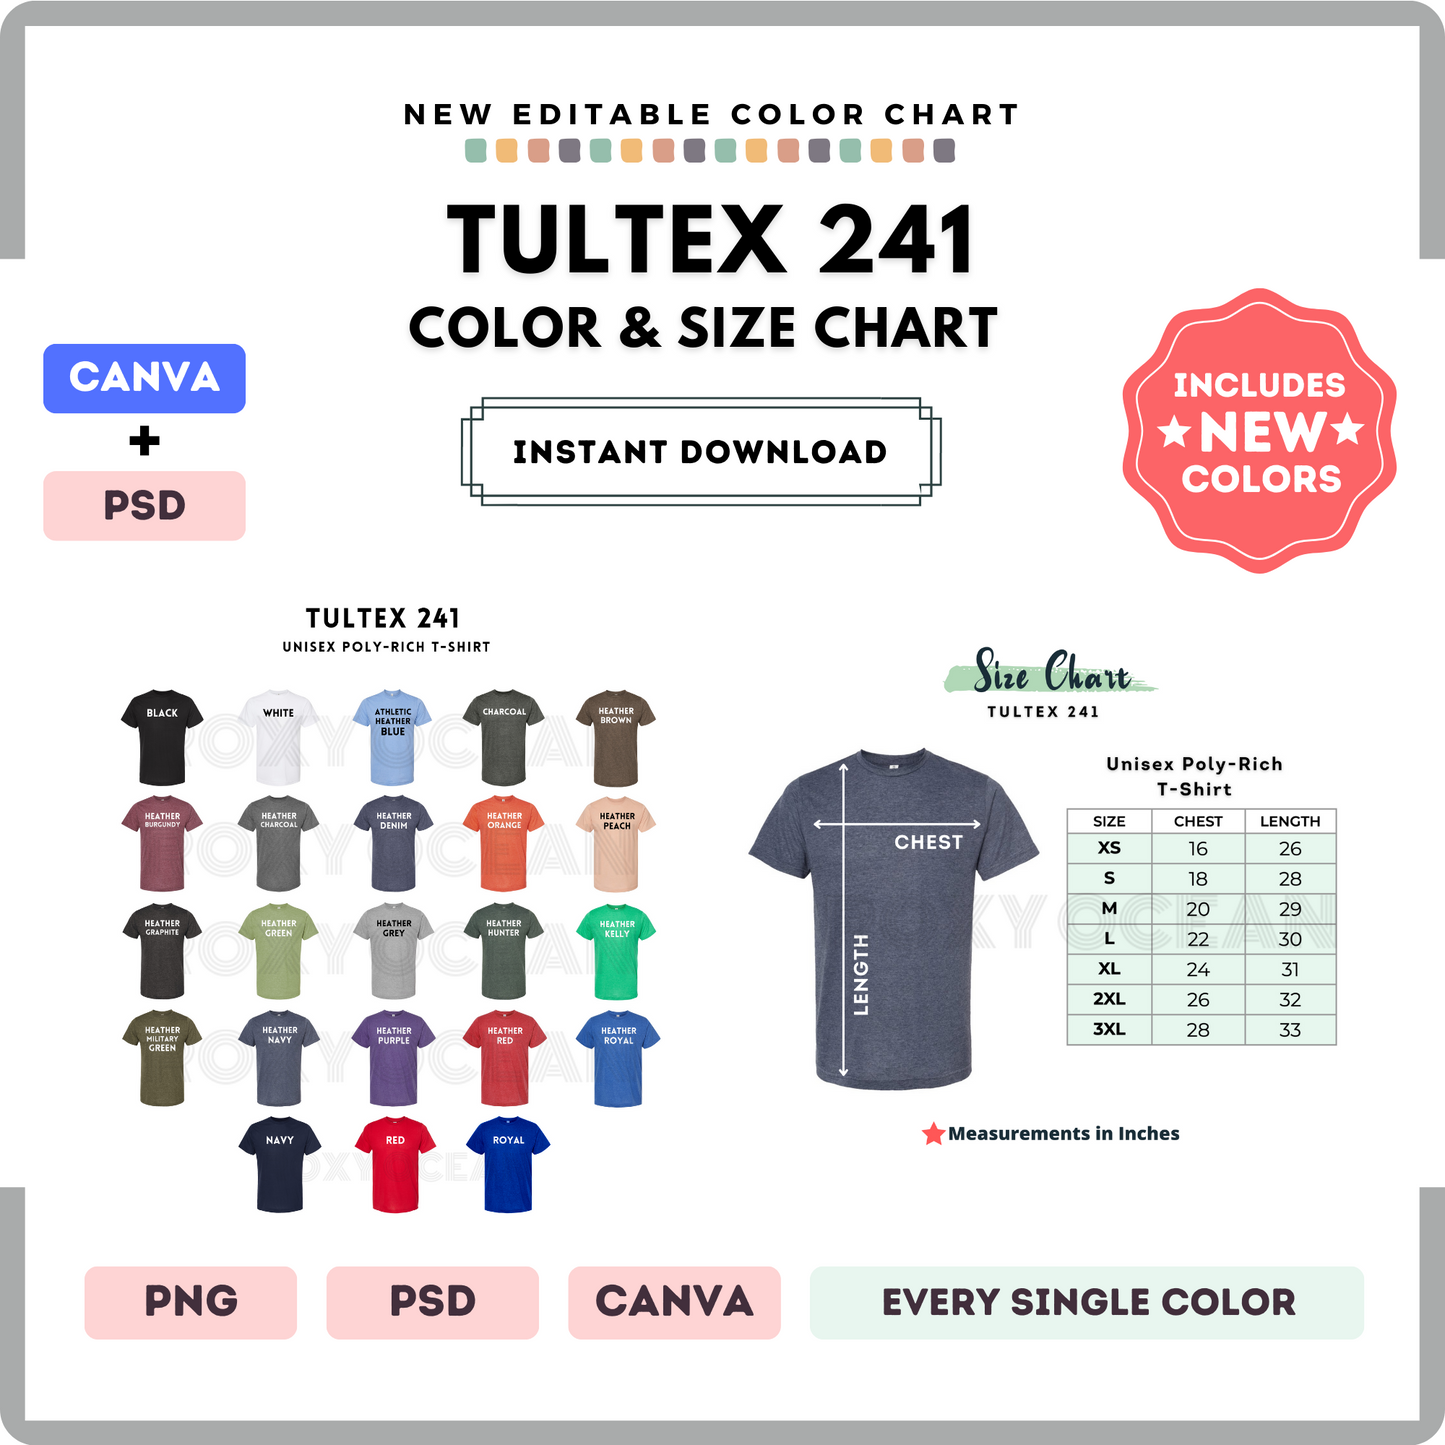 Tultex 241 Color and Size Chart